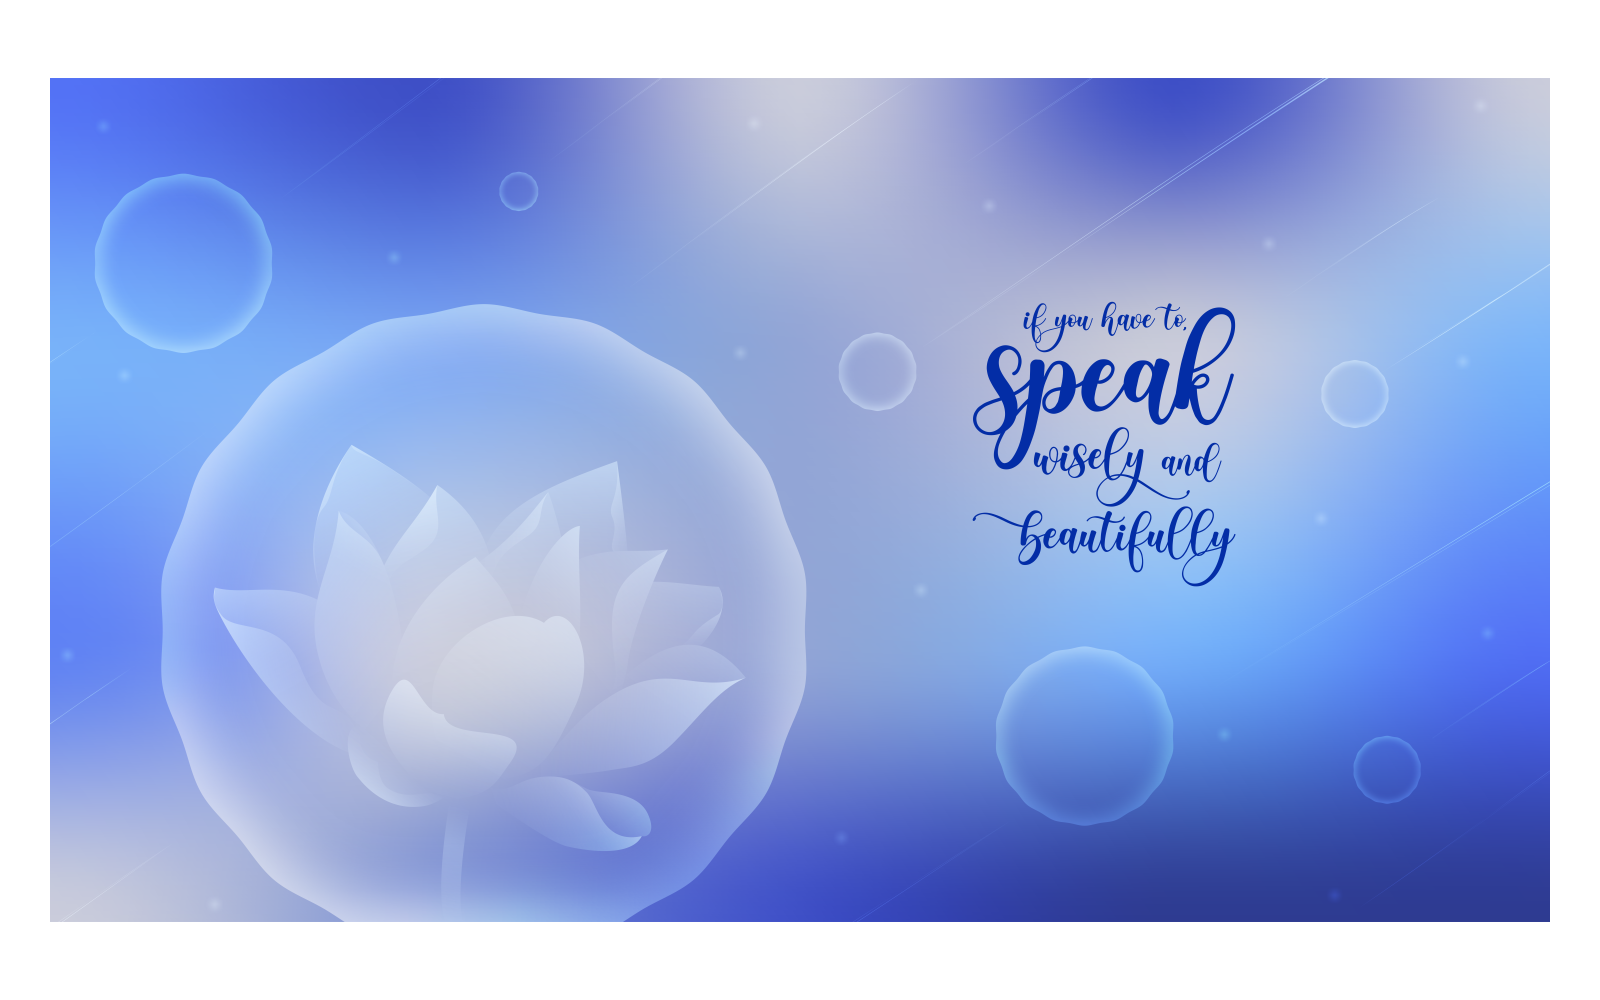 Blue Inspirational Backgrounds 14400x8100px With Lotus And Message About Communication